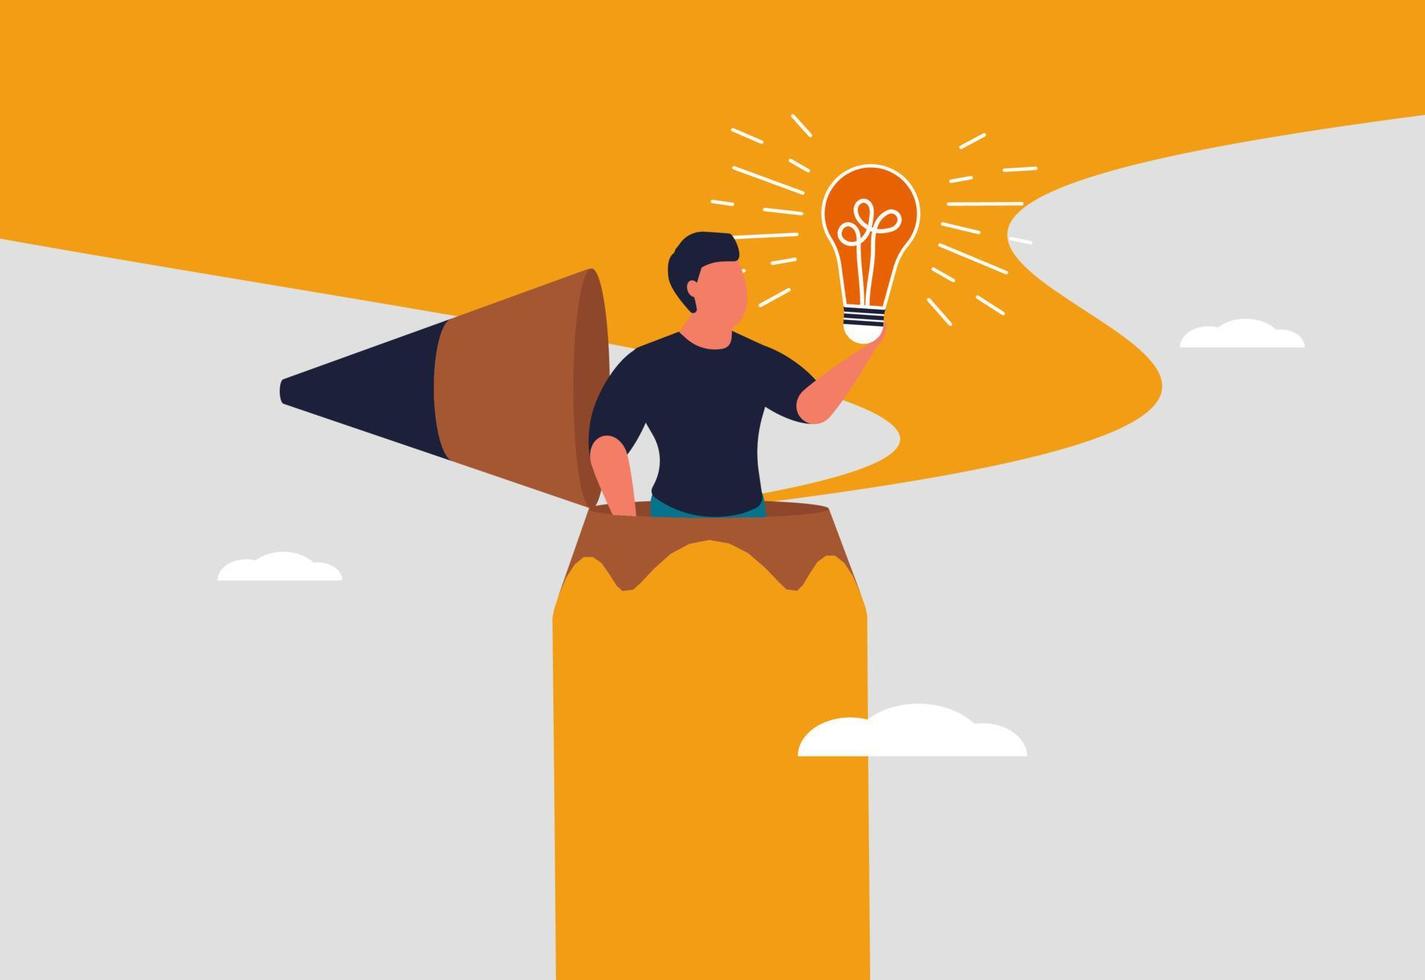 Creative person and creative idea. A young man opens up an idea and his imagination. Inspiration for creative people. The man is holding a light bulb. Vector illustration